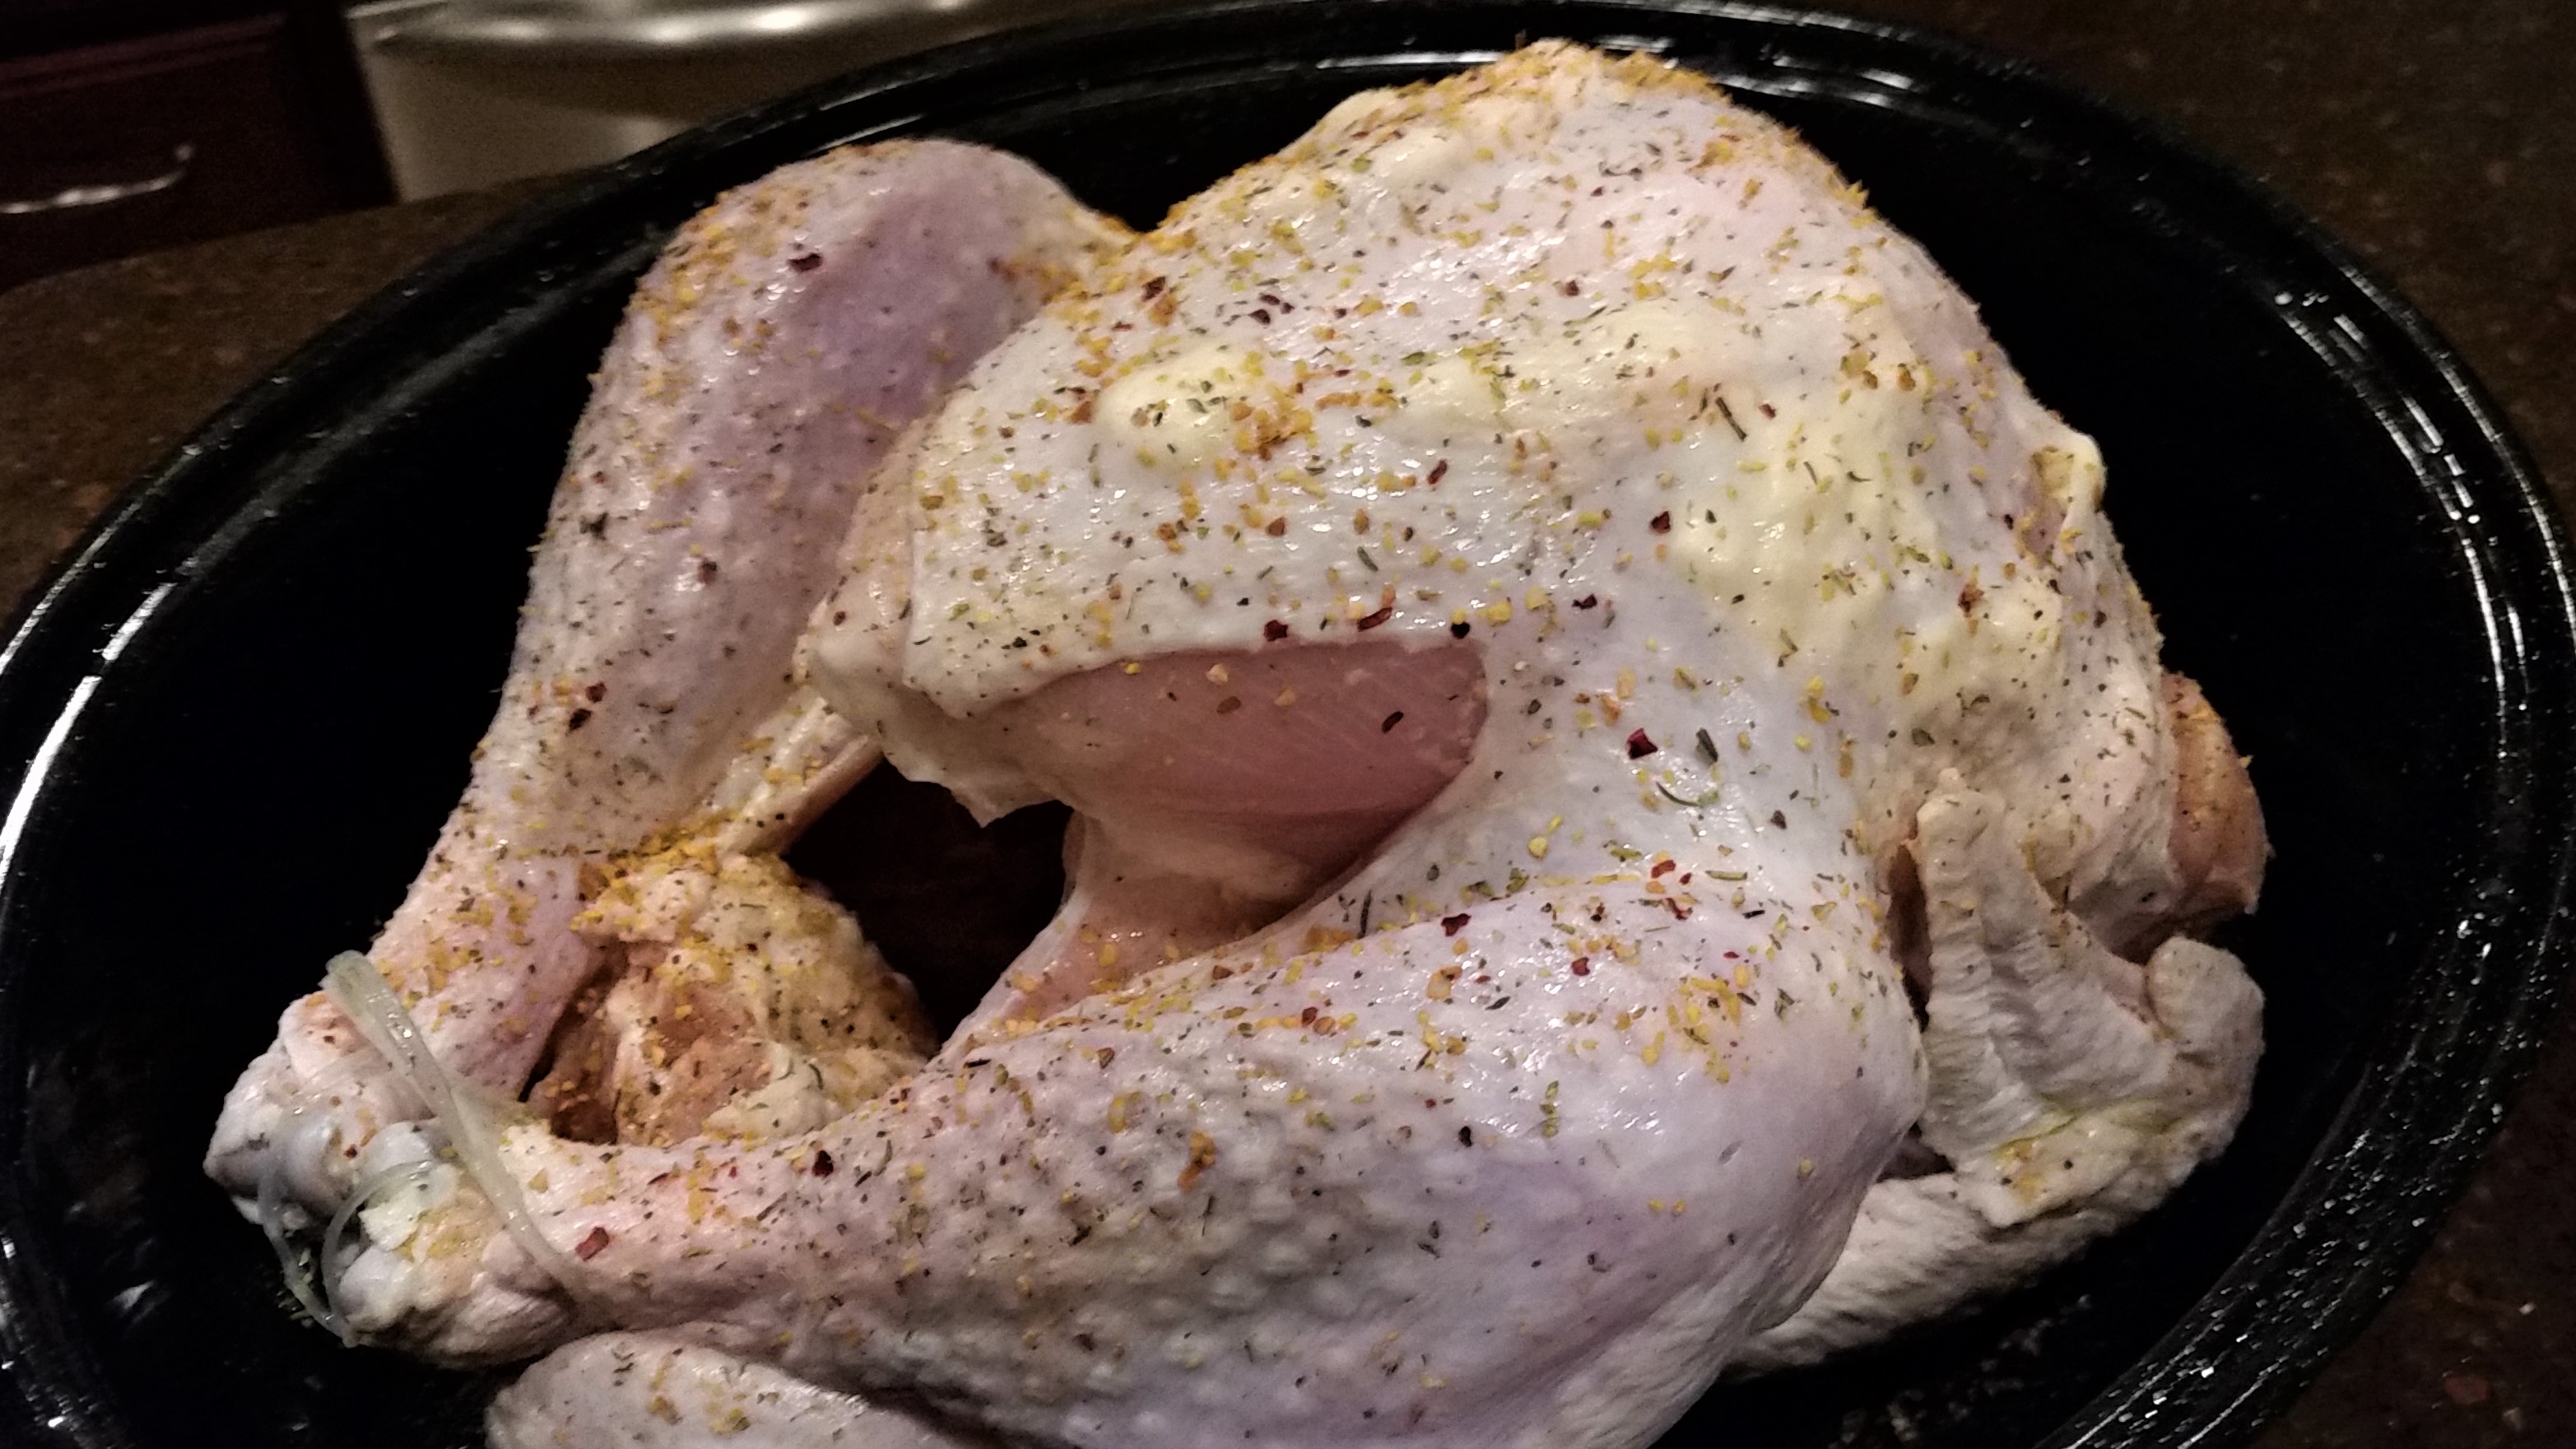 How to make a Juicy Turkey